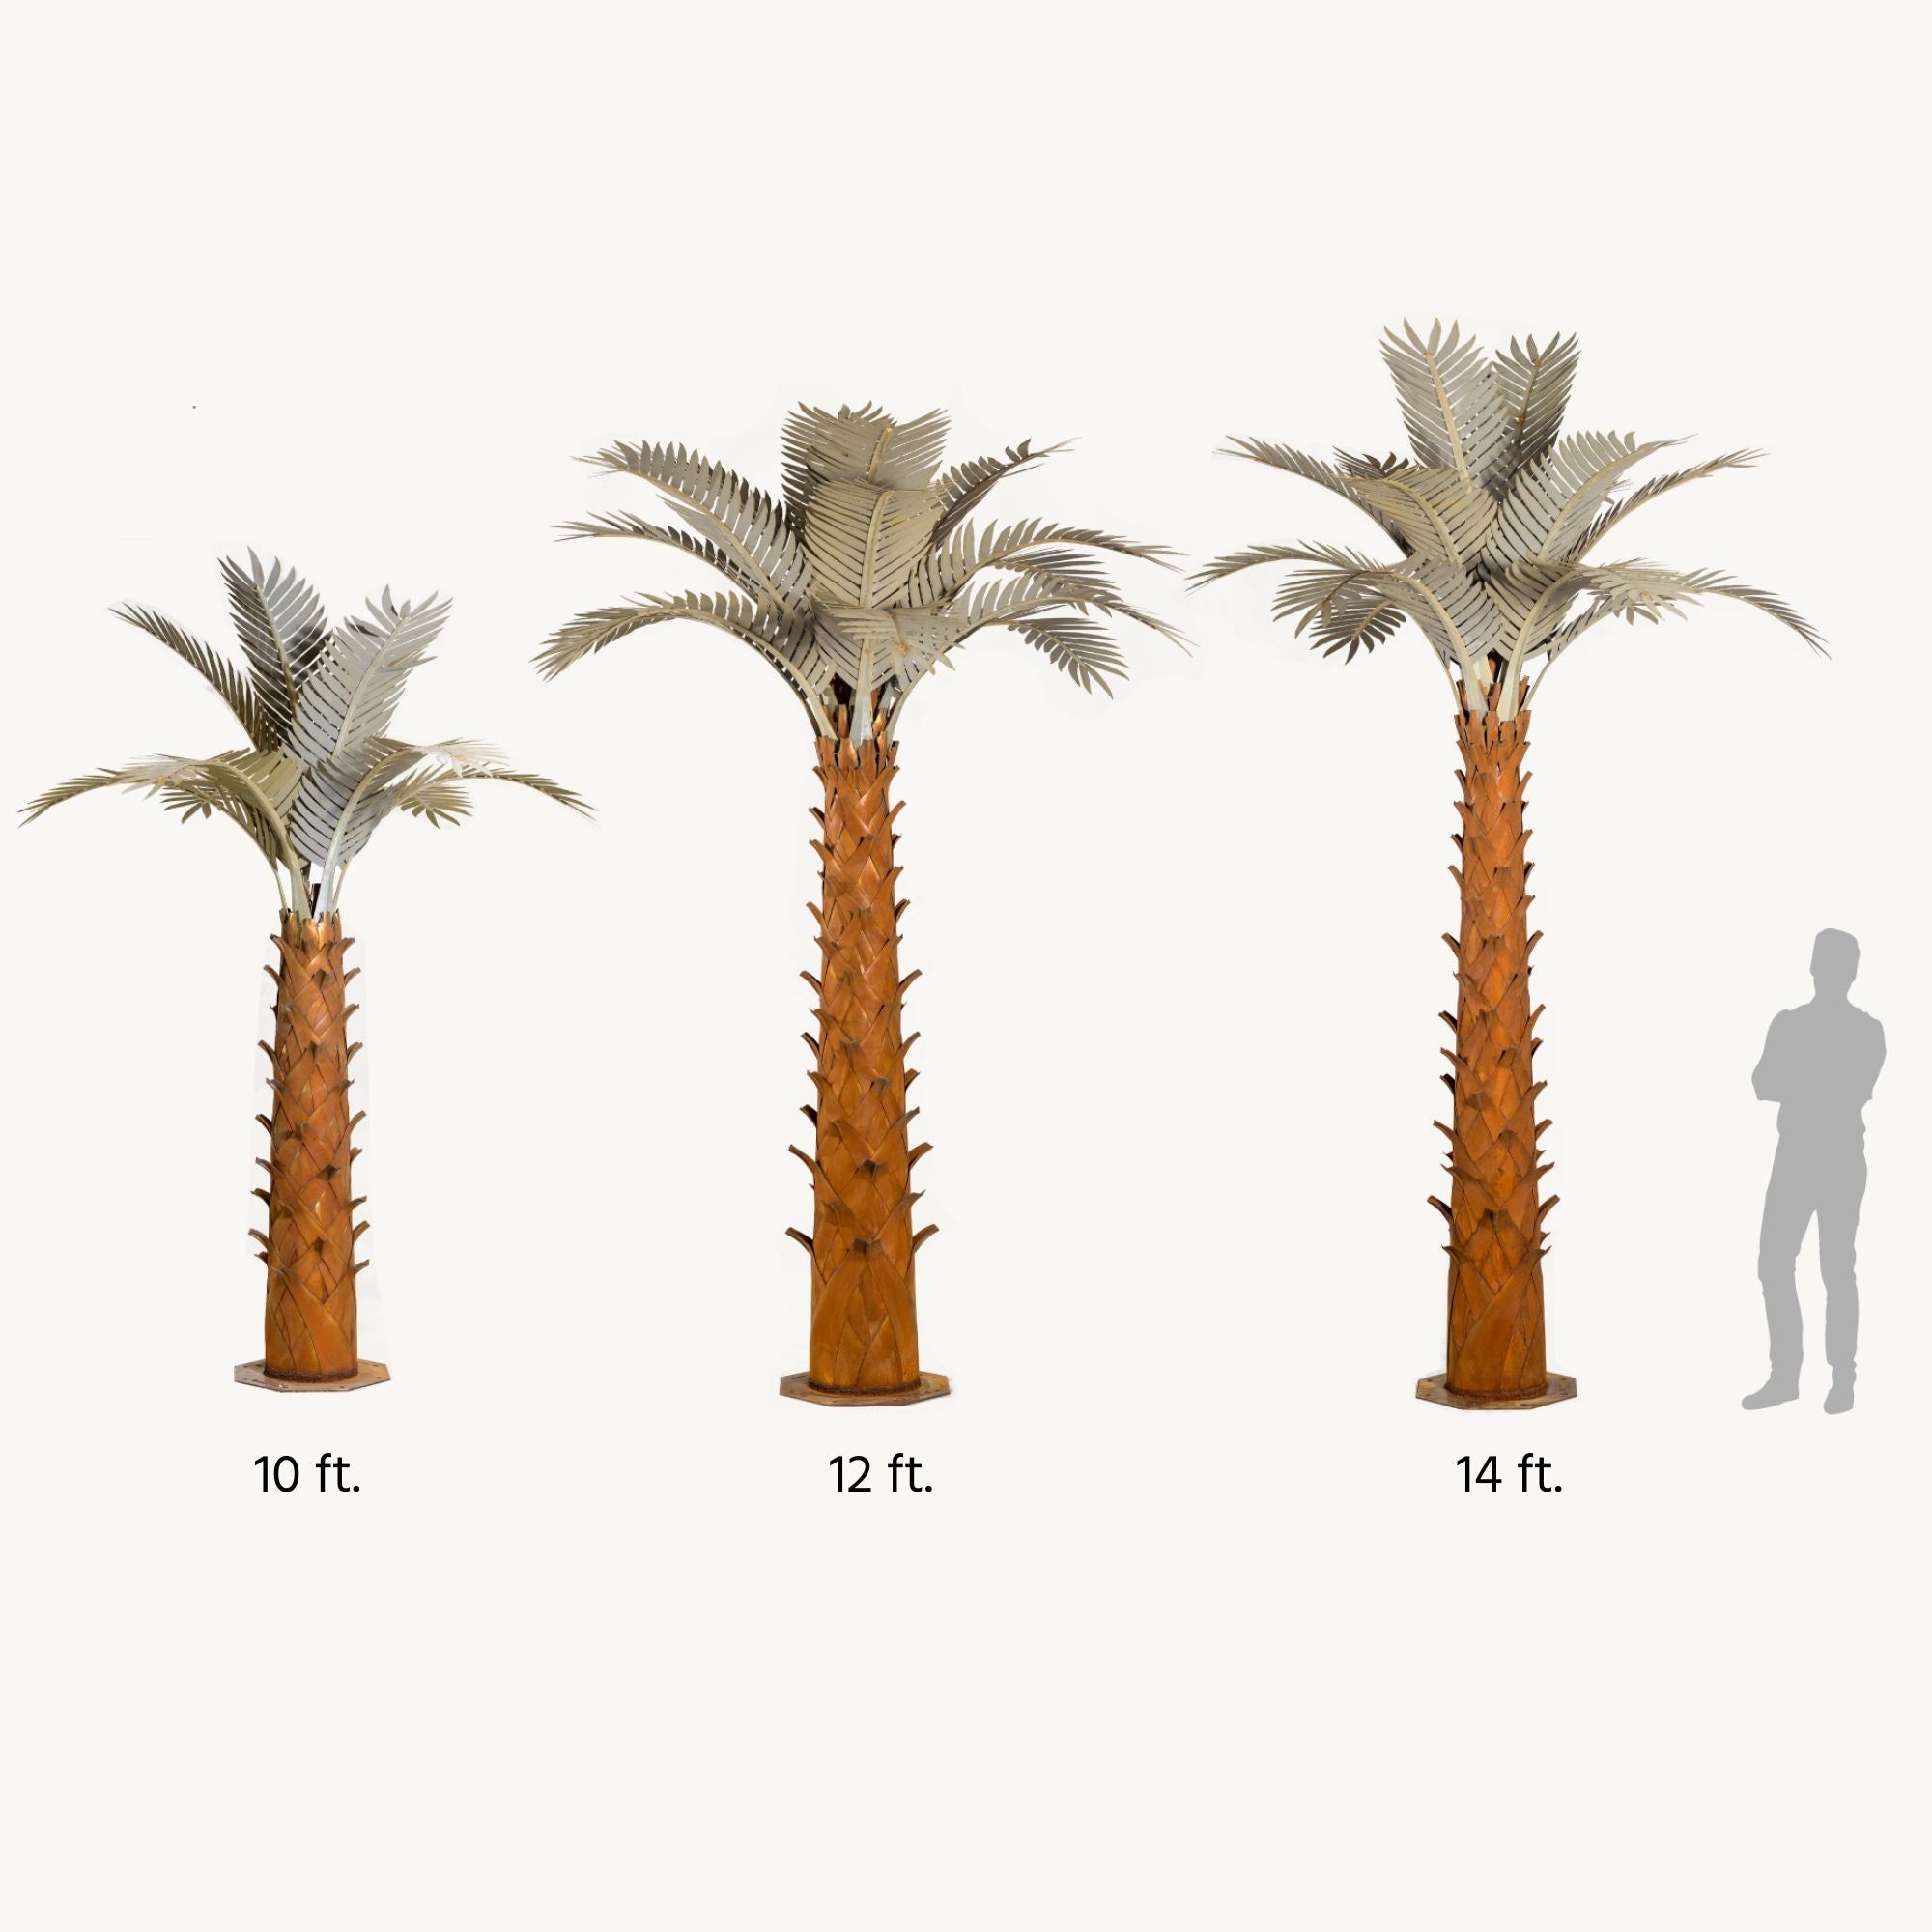 A size guide displaying the scale difference between 10ft, 12ft, and 14ft metal paradise palm trees. The sculpture's intricate design features realistic palm fronds and textured trunk, creating a lifelike appearance.